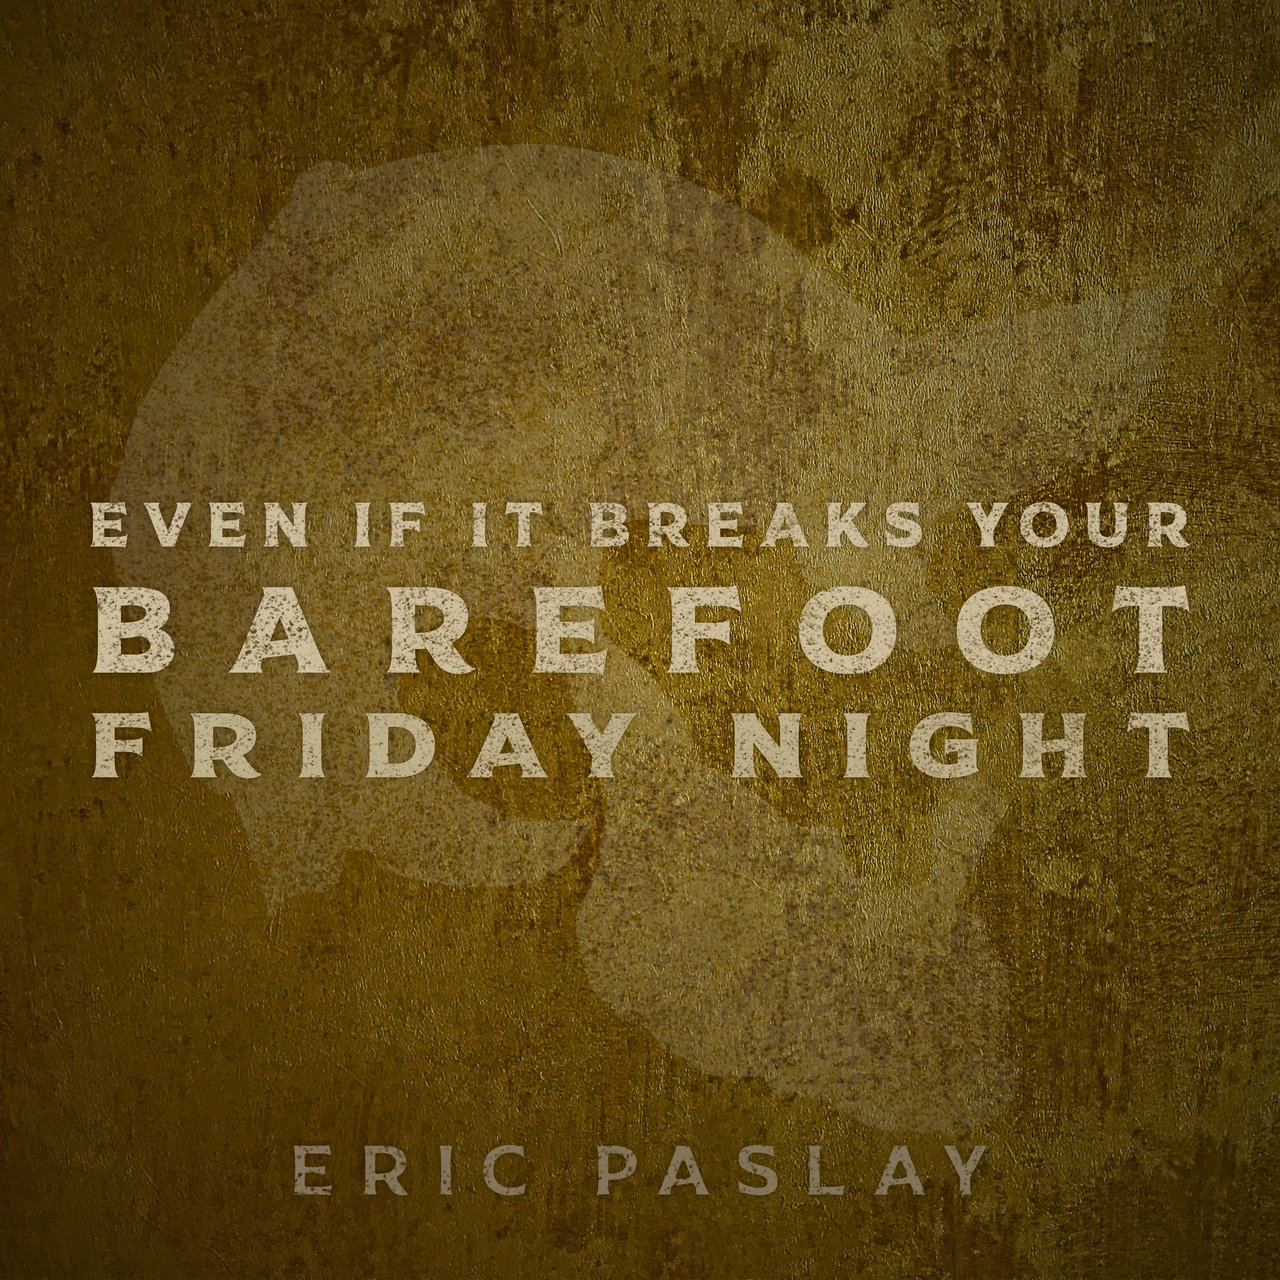 Eric Paslay · Even If It Breaks Your Barefoot Friday Night (2022 · FLAC+MP3)